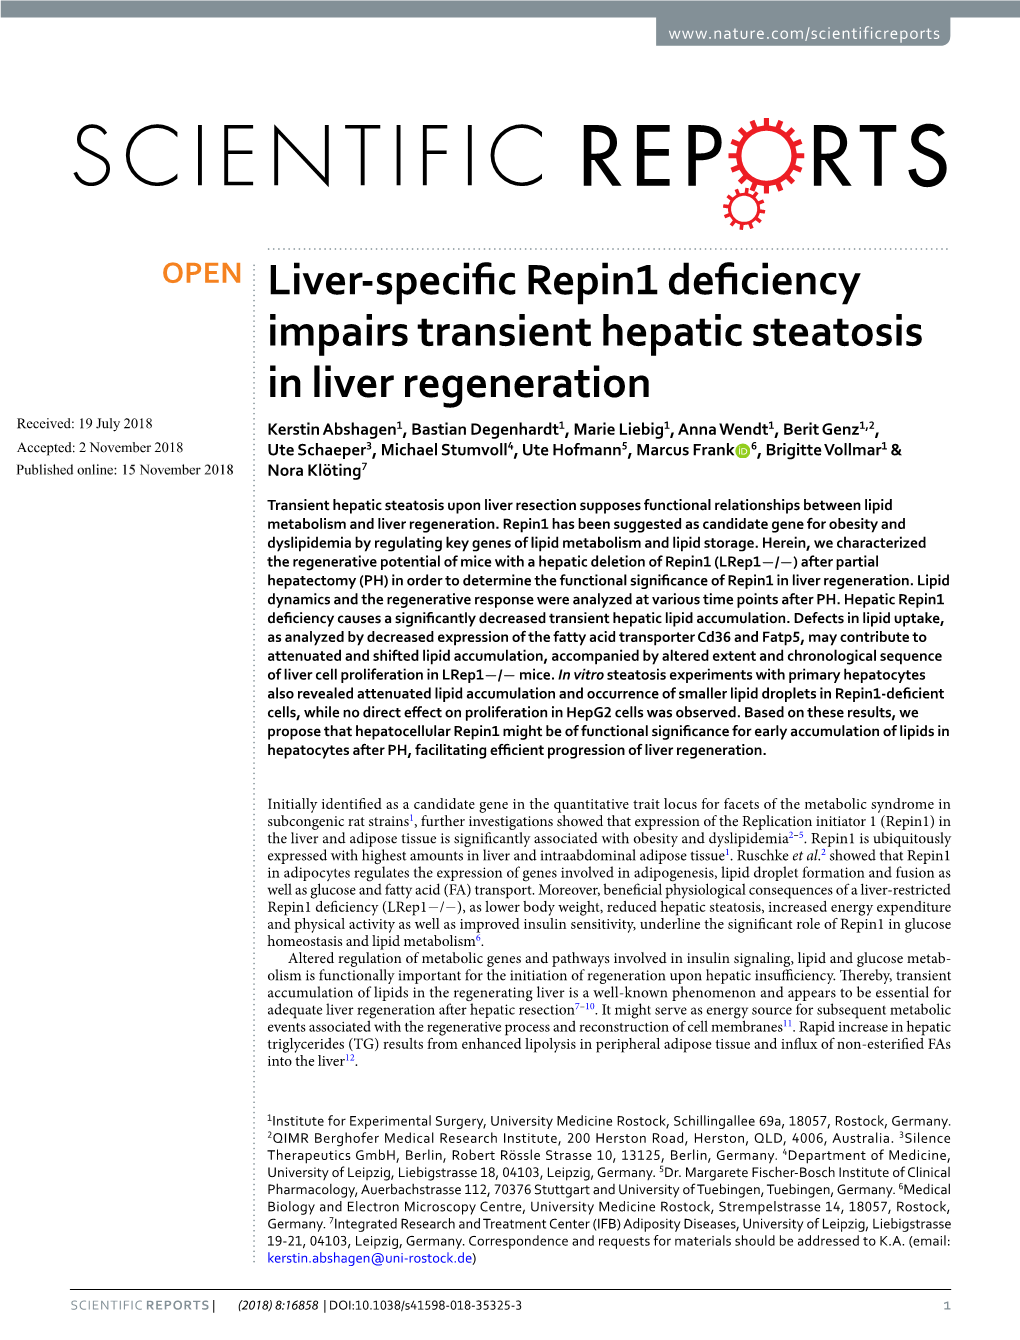 Liver-Specific Repin1 Deficiency Impairs Transient Hepatic Steatosis